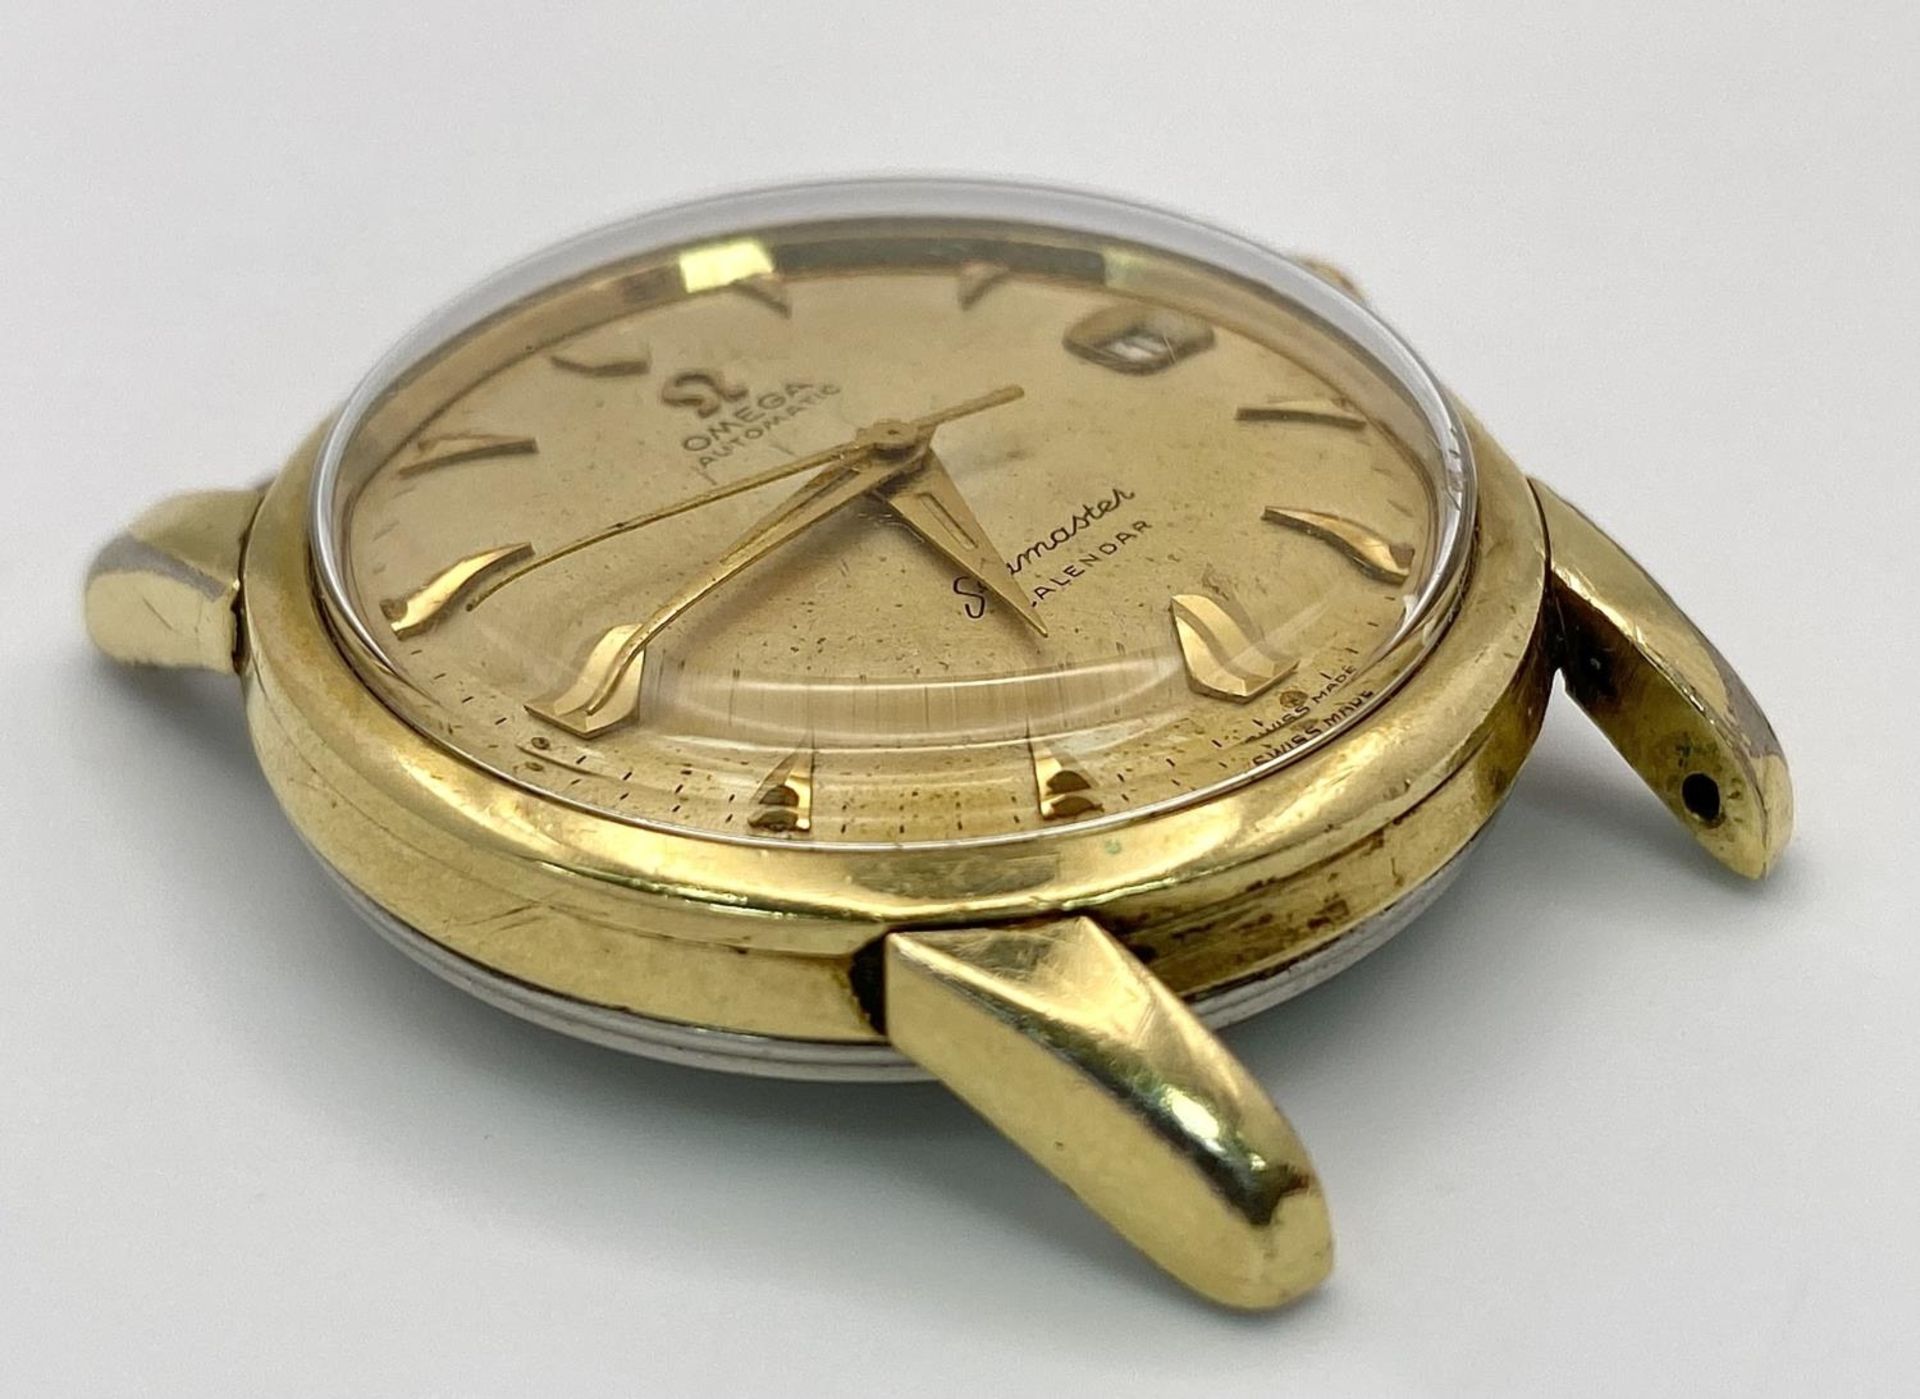 A Vintage Omega Seamaster Calendar Automatic Watch Case - 34mm. Gilded dial with date window. In - Bild 3 aus 5